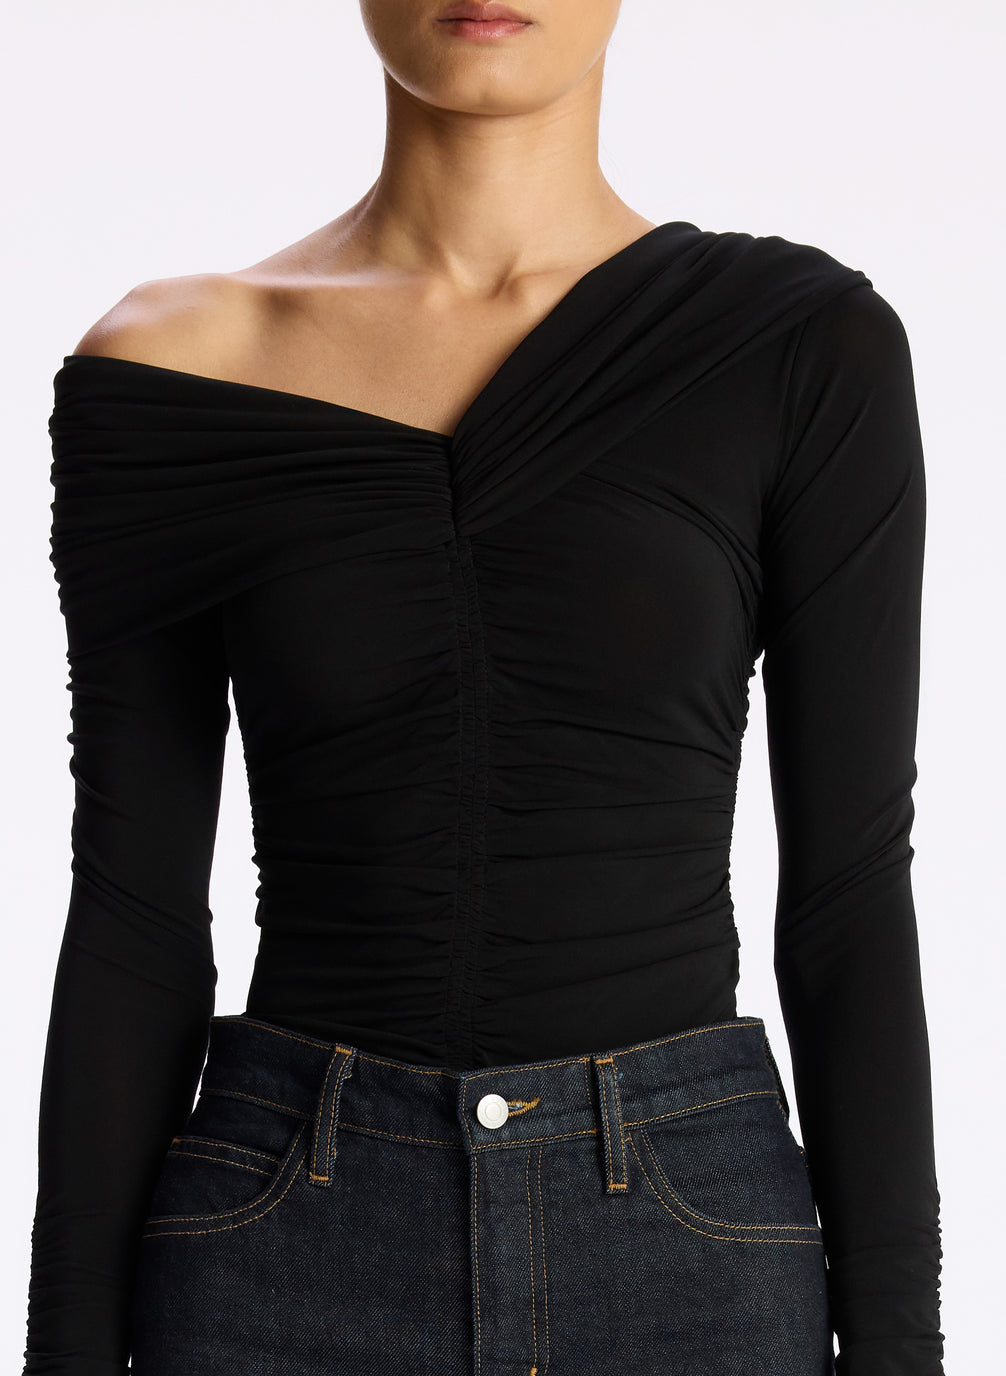 detail view of woman wearing black off shoulder long sleeve jersey top and dark wash denim jeans